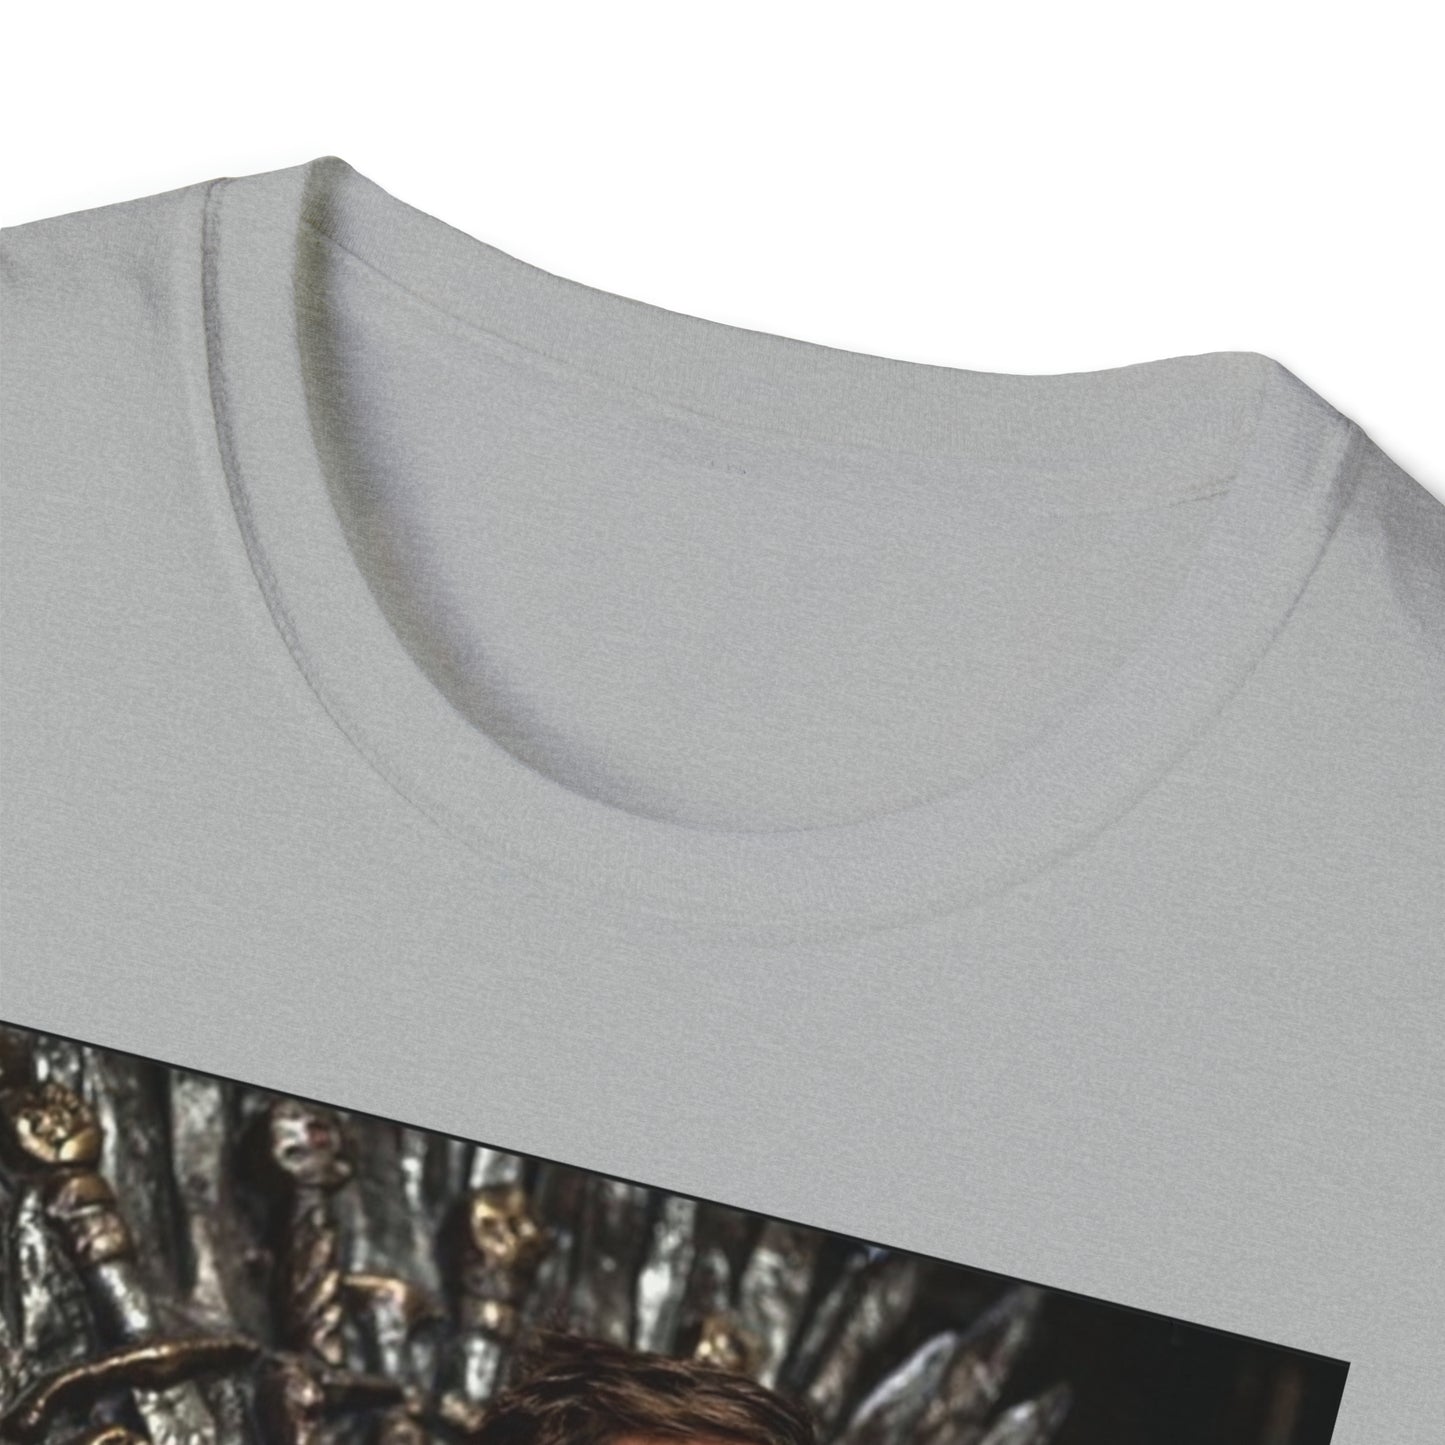 Aaron Rodgers Game Of Thrones Shirt